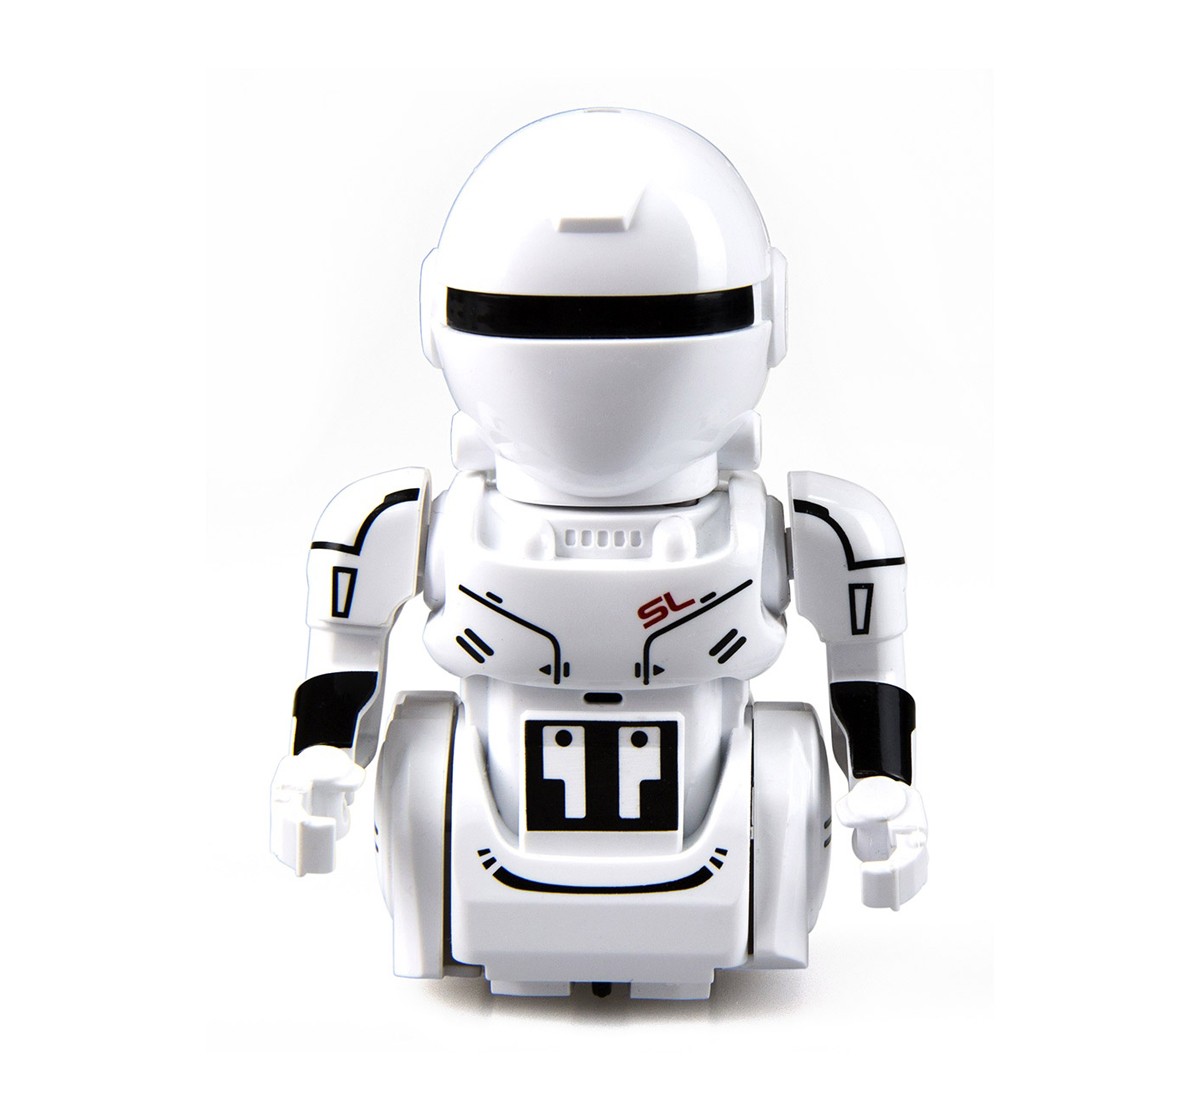 Silverlit YCOO Mini Robot - OP One A Palm size Remote Control Robot with LED Eyes & Robotic sound SFX!  Robotics for Kids age 3Y+ (White)